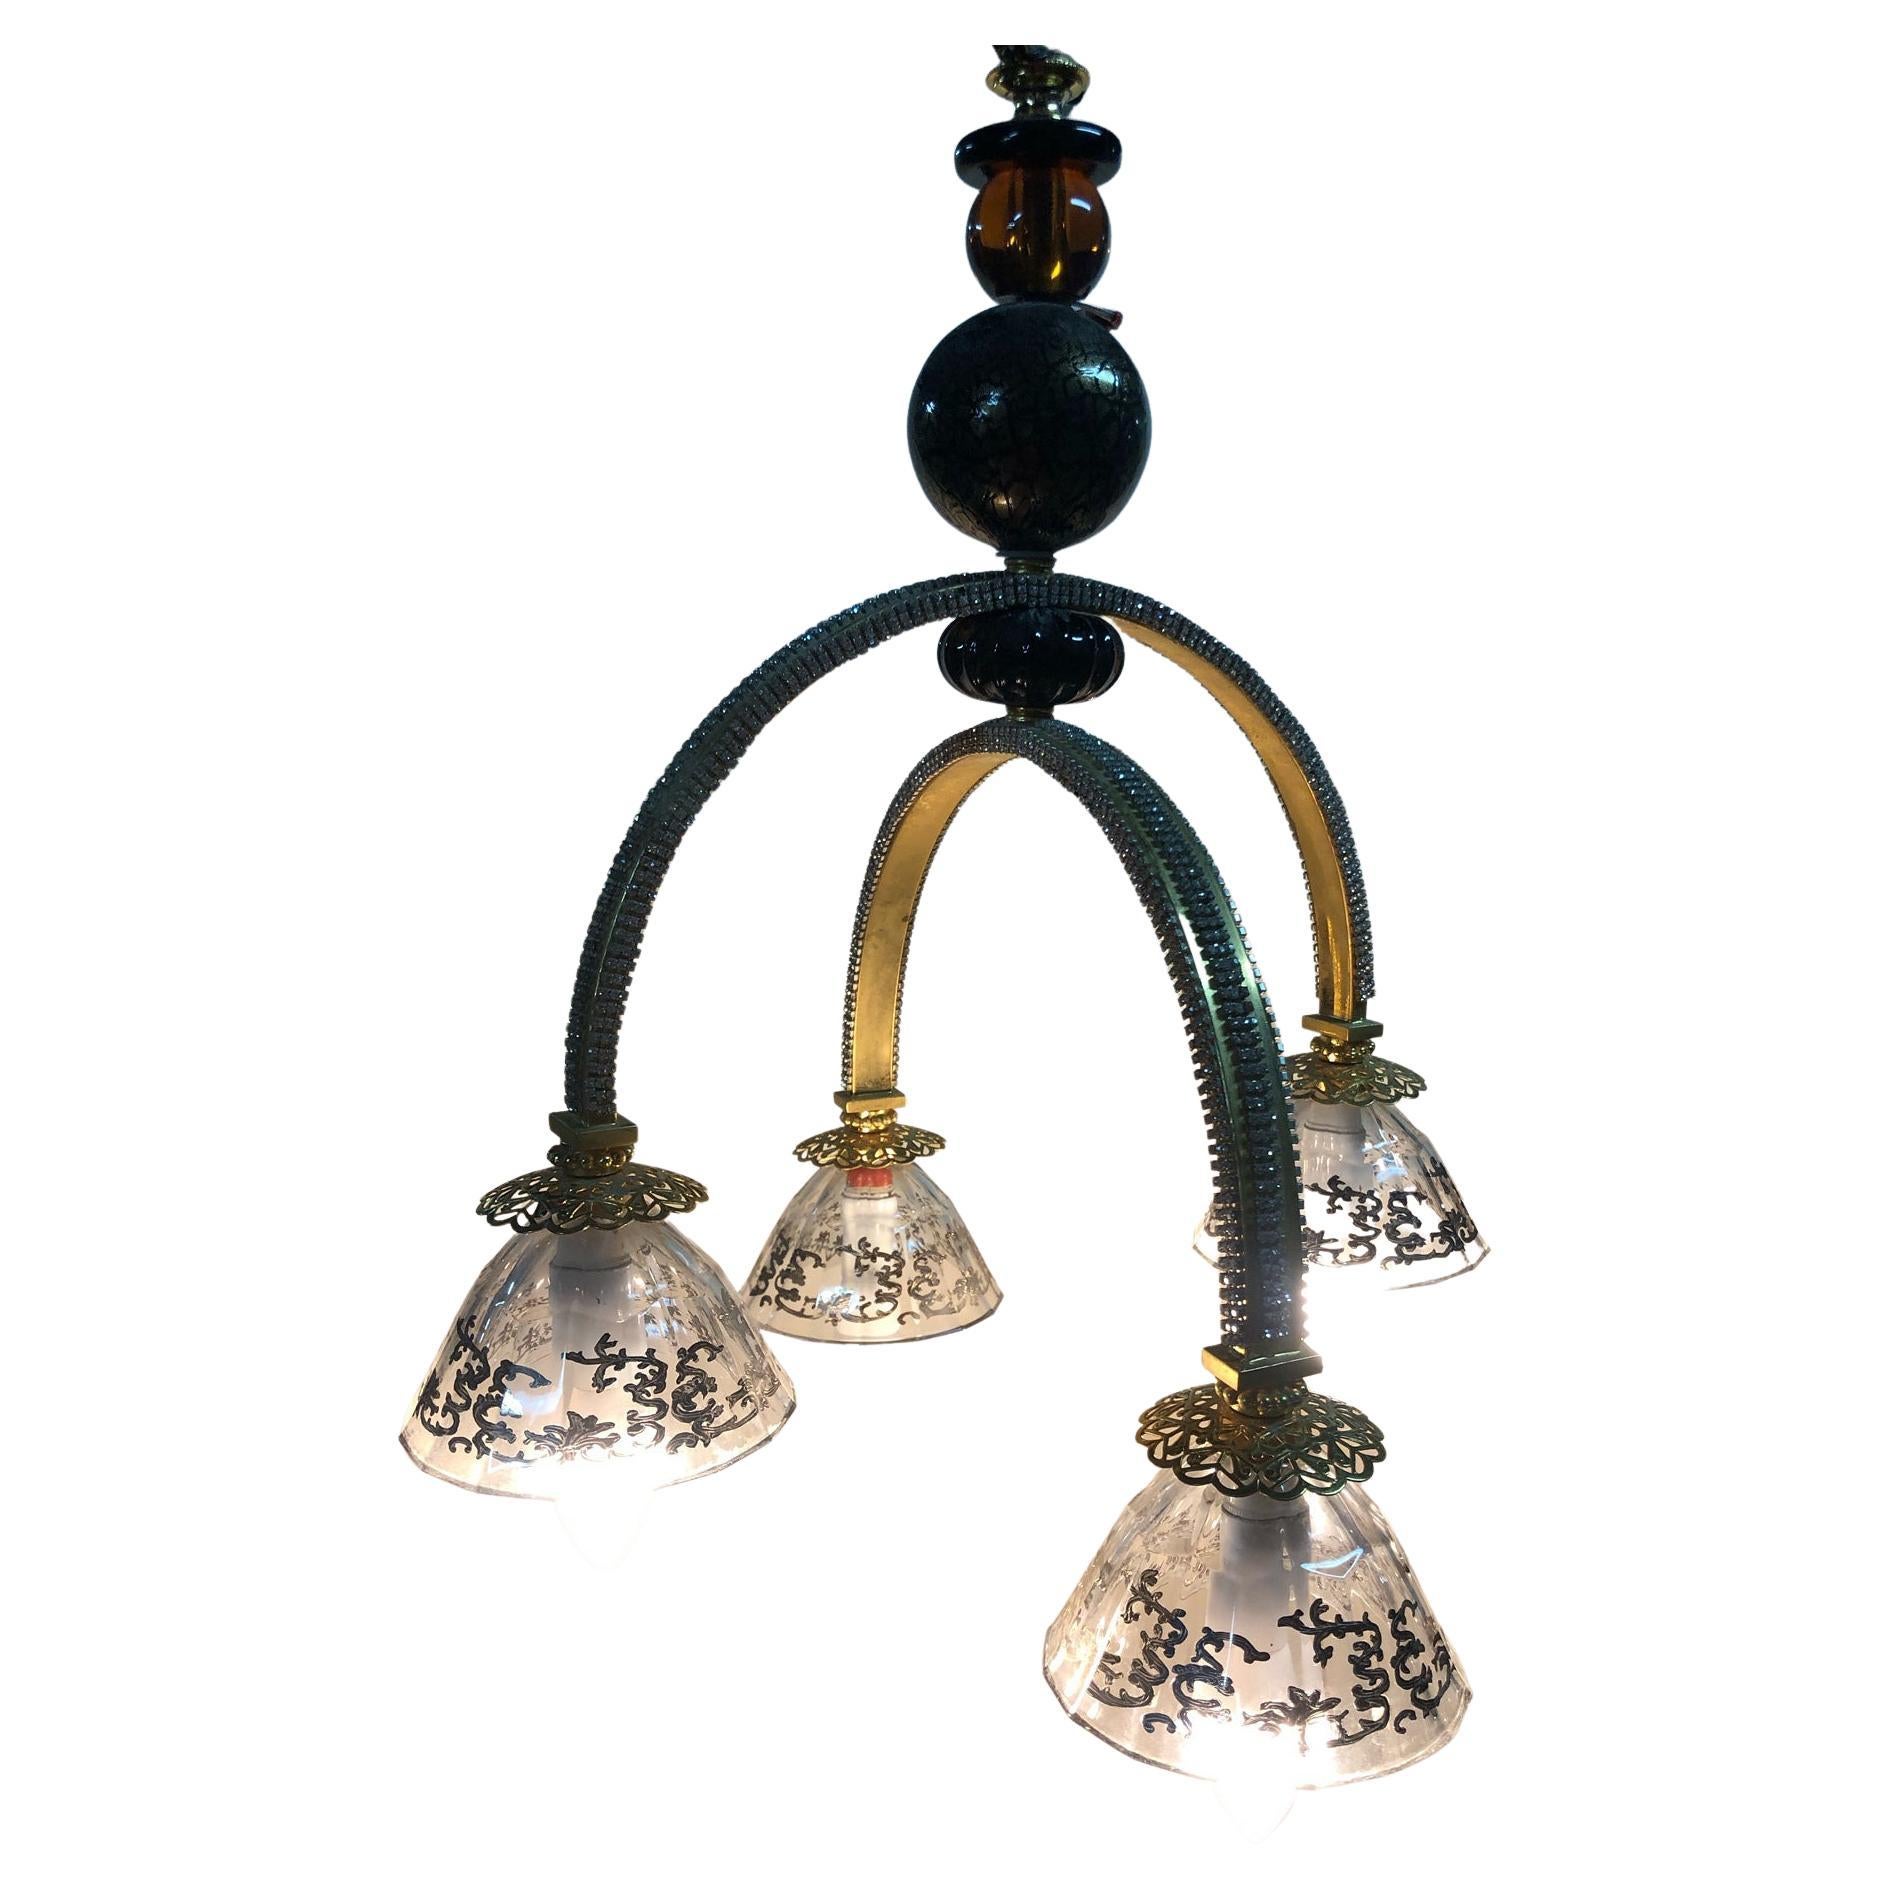 Italian Chandelier in Rhinestones with Four Lights with Original Gold Coloring